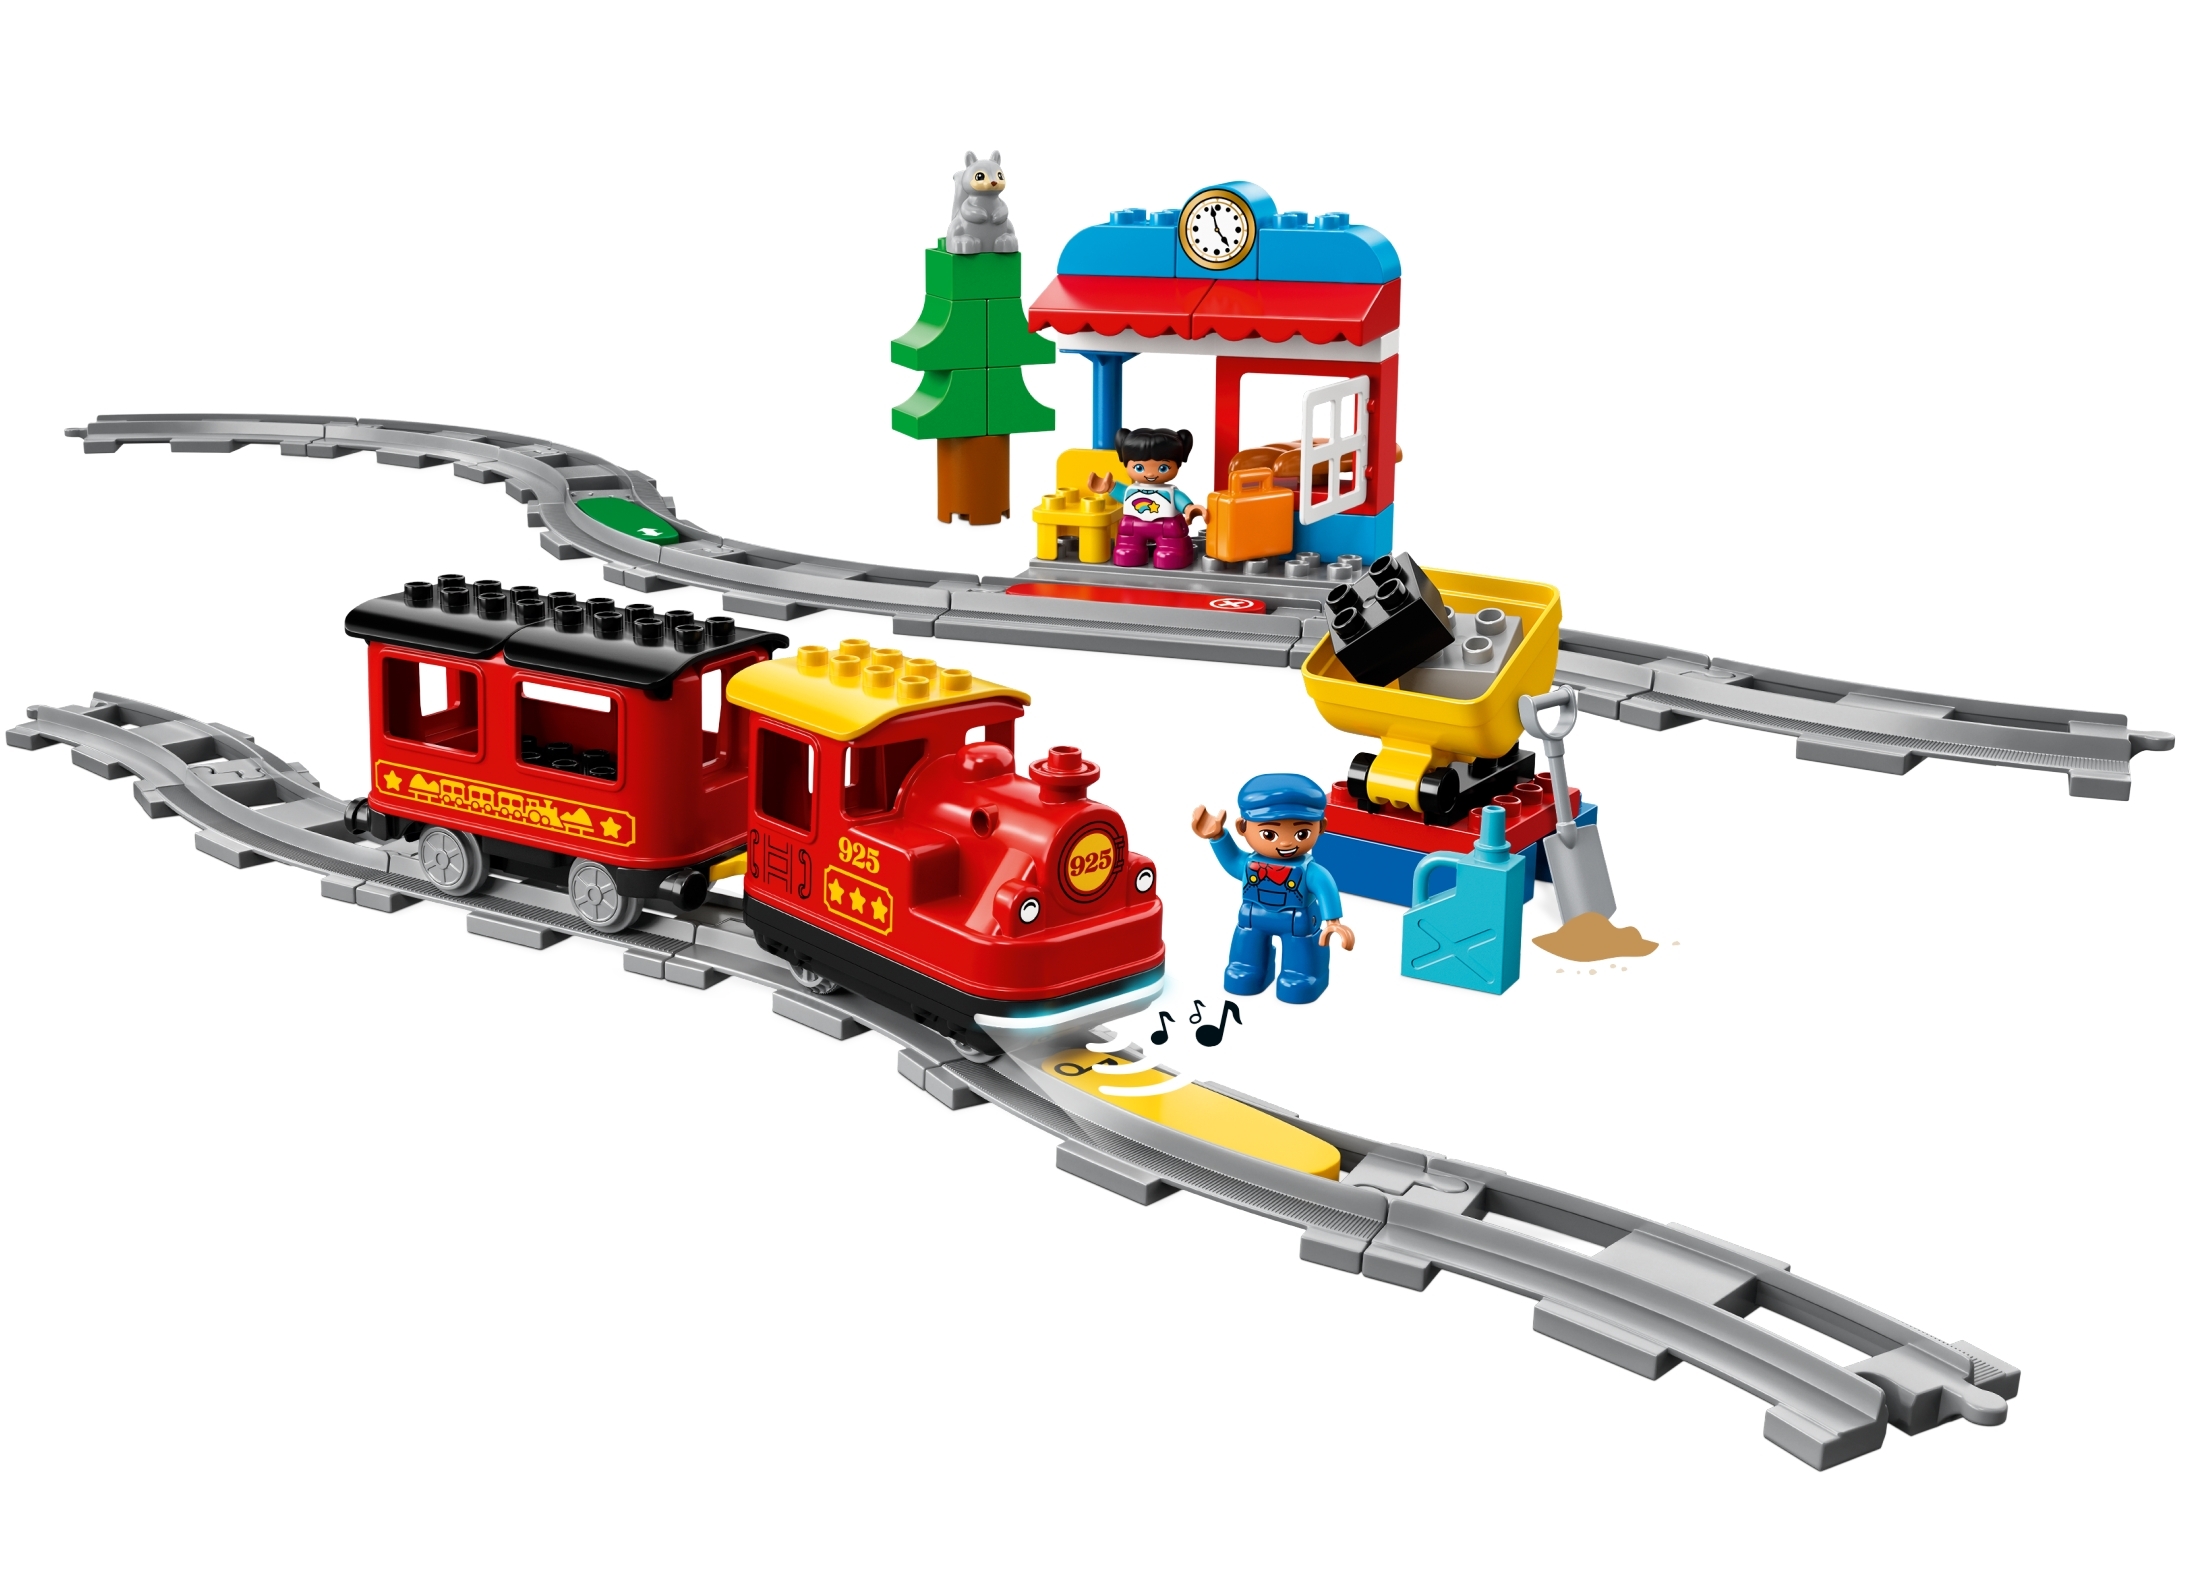 Website with layout plans for LEGO Duplo trains? - Bricks